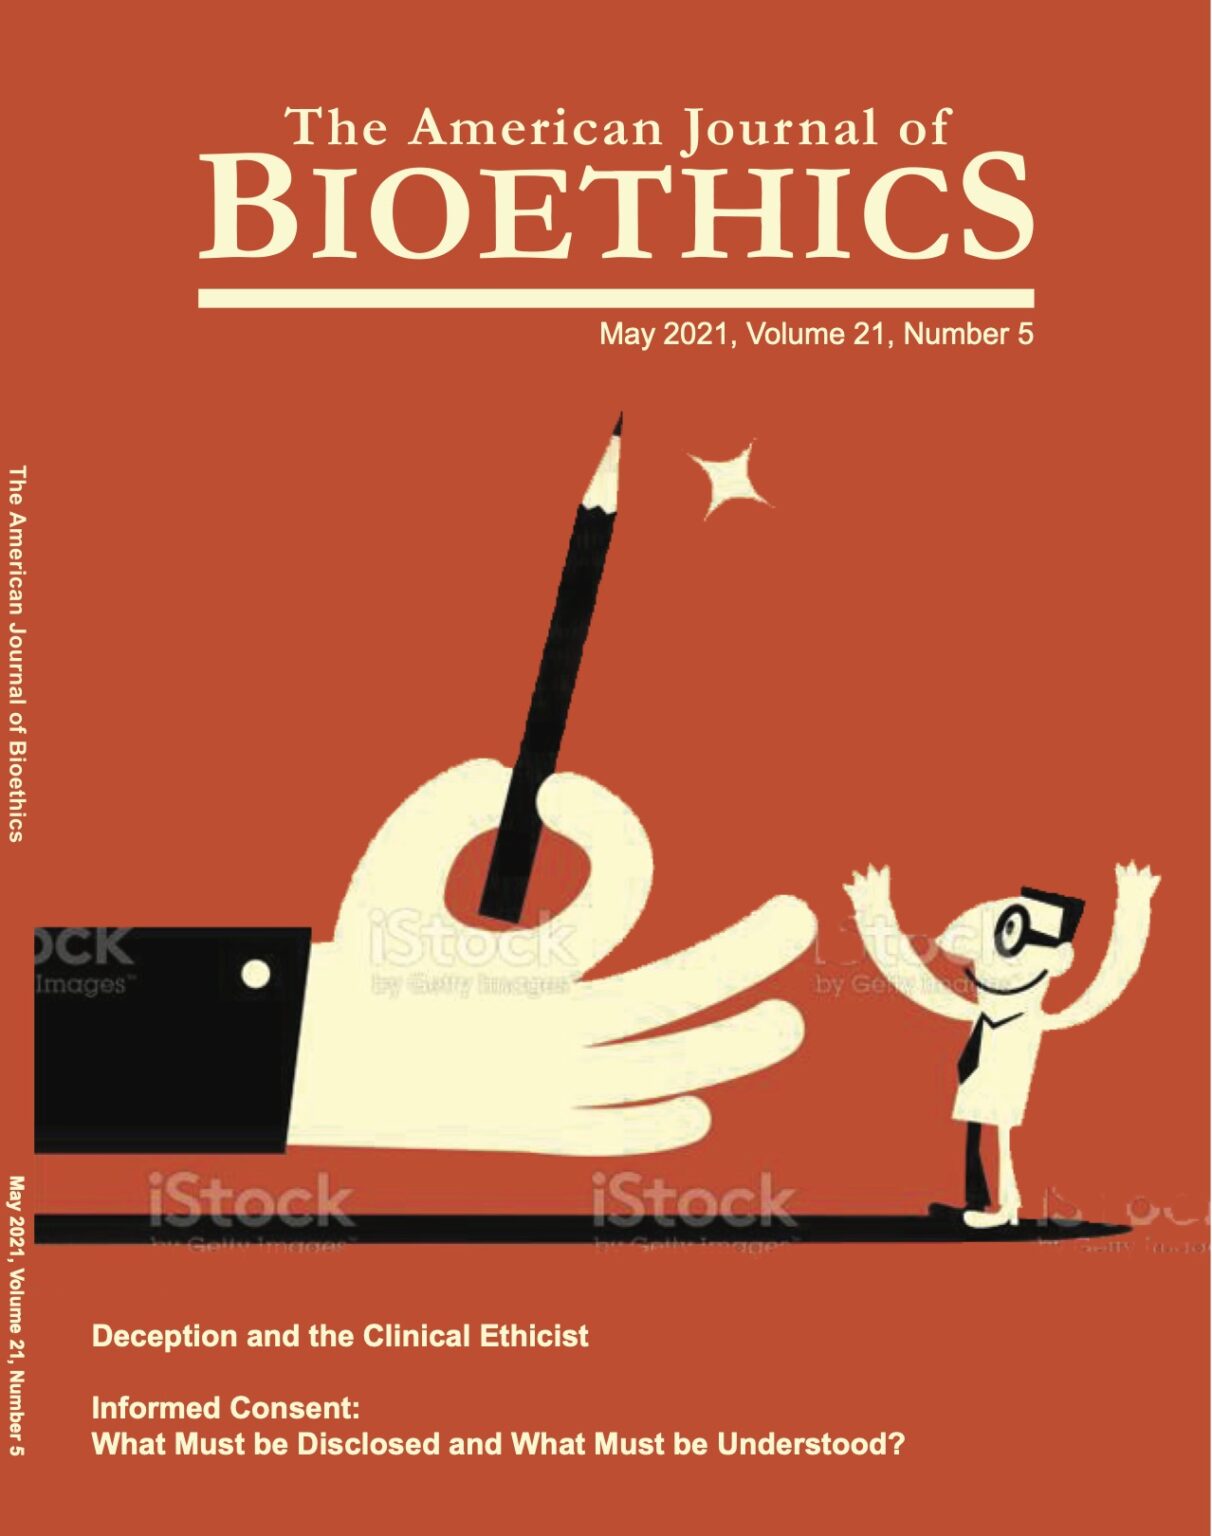 Open Peer Commentary calls Bioethics Today